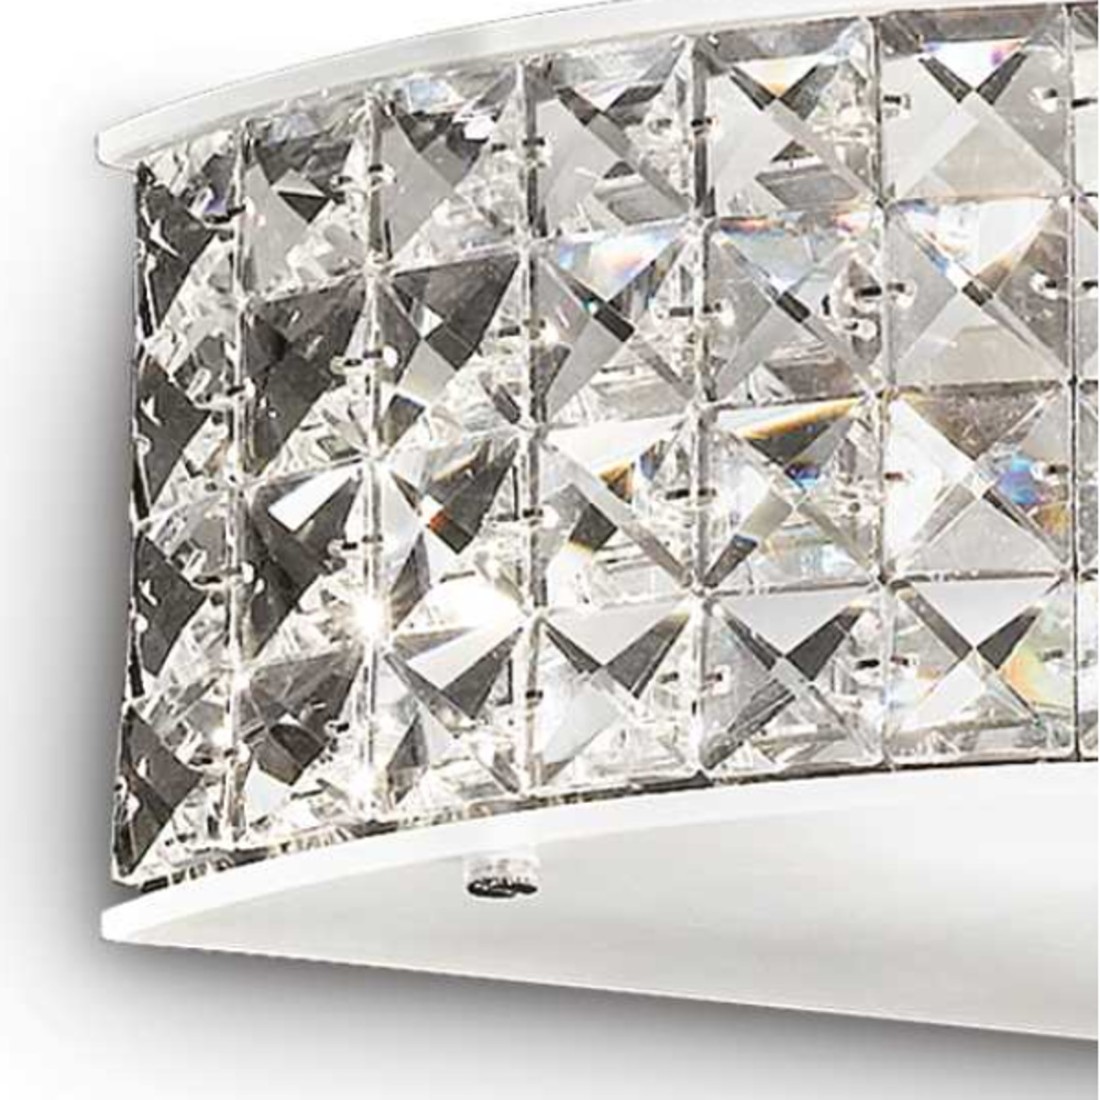 Applique moderno Ideal Lux ROMA AP2 093086 G9 LED